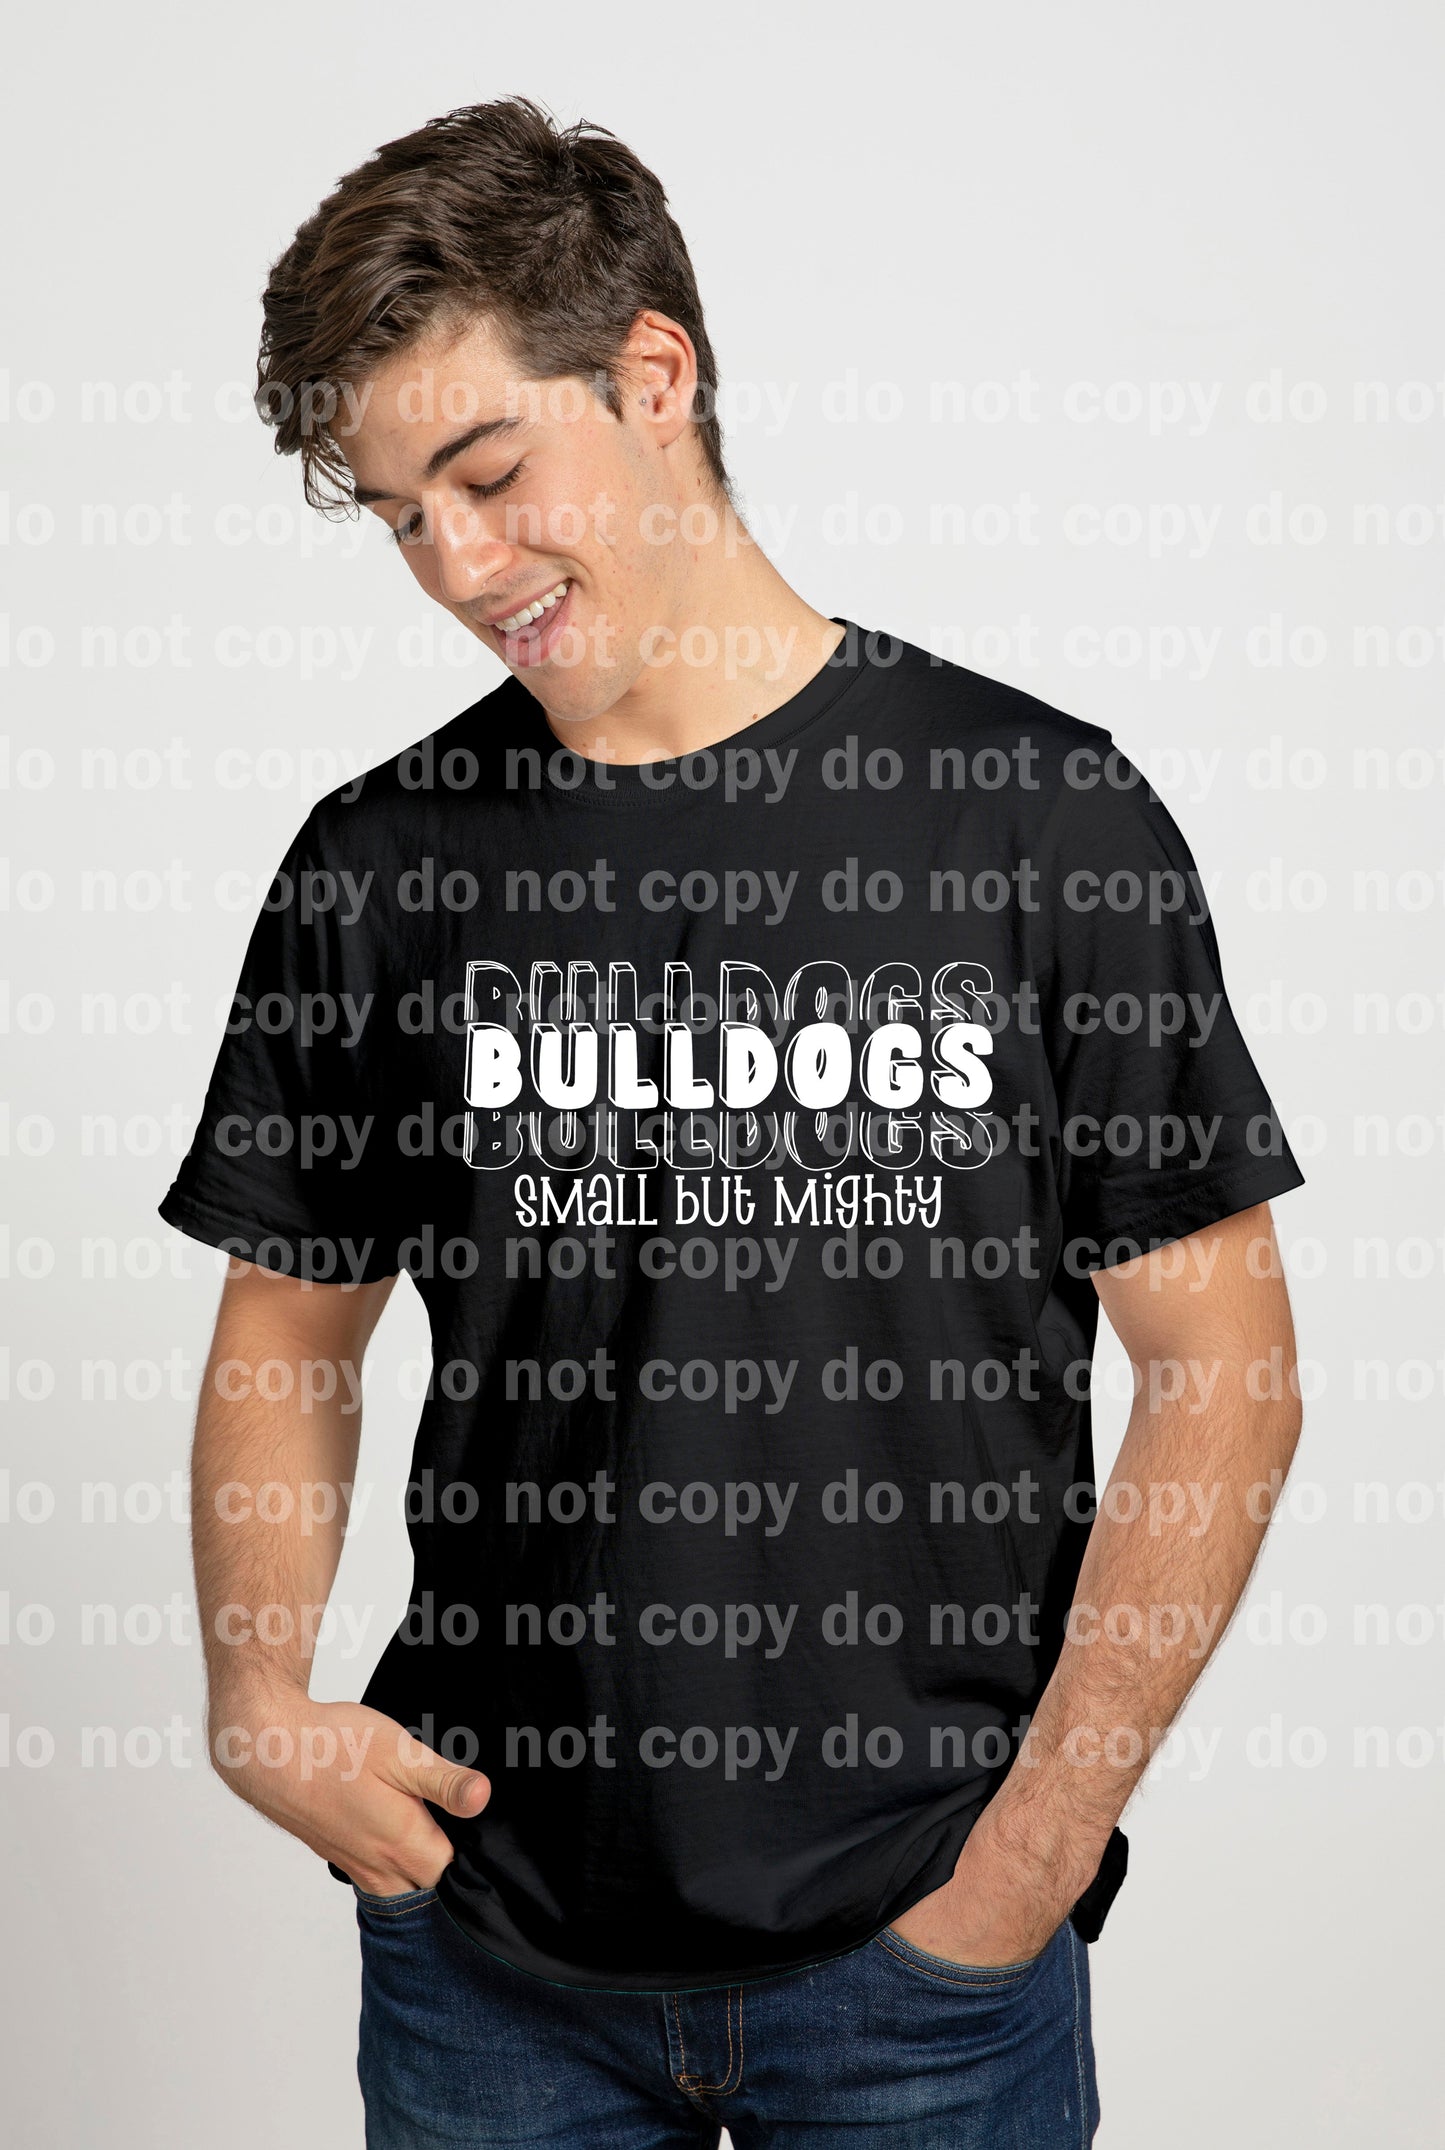 Bulldogs Small But Mighty Black/White Dream Print or Sublimation Print